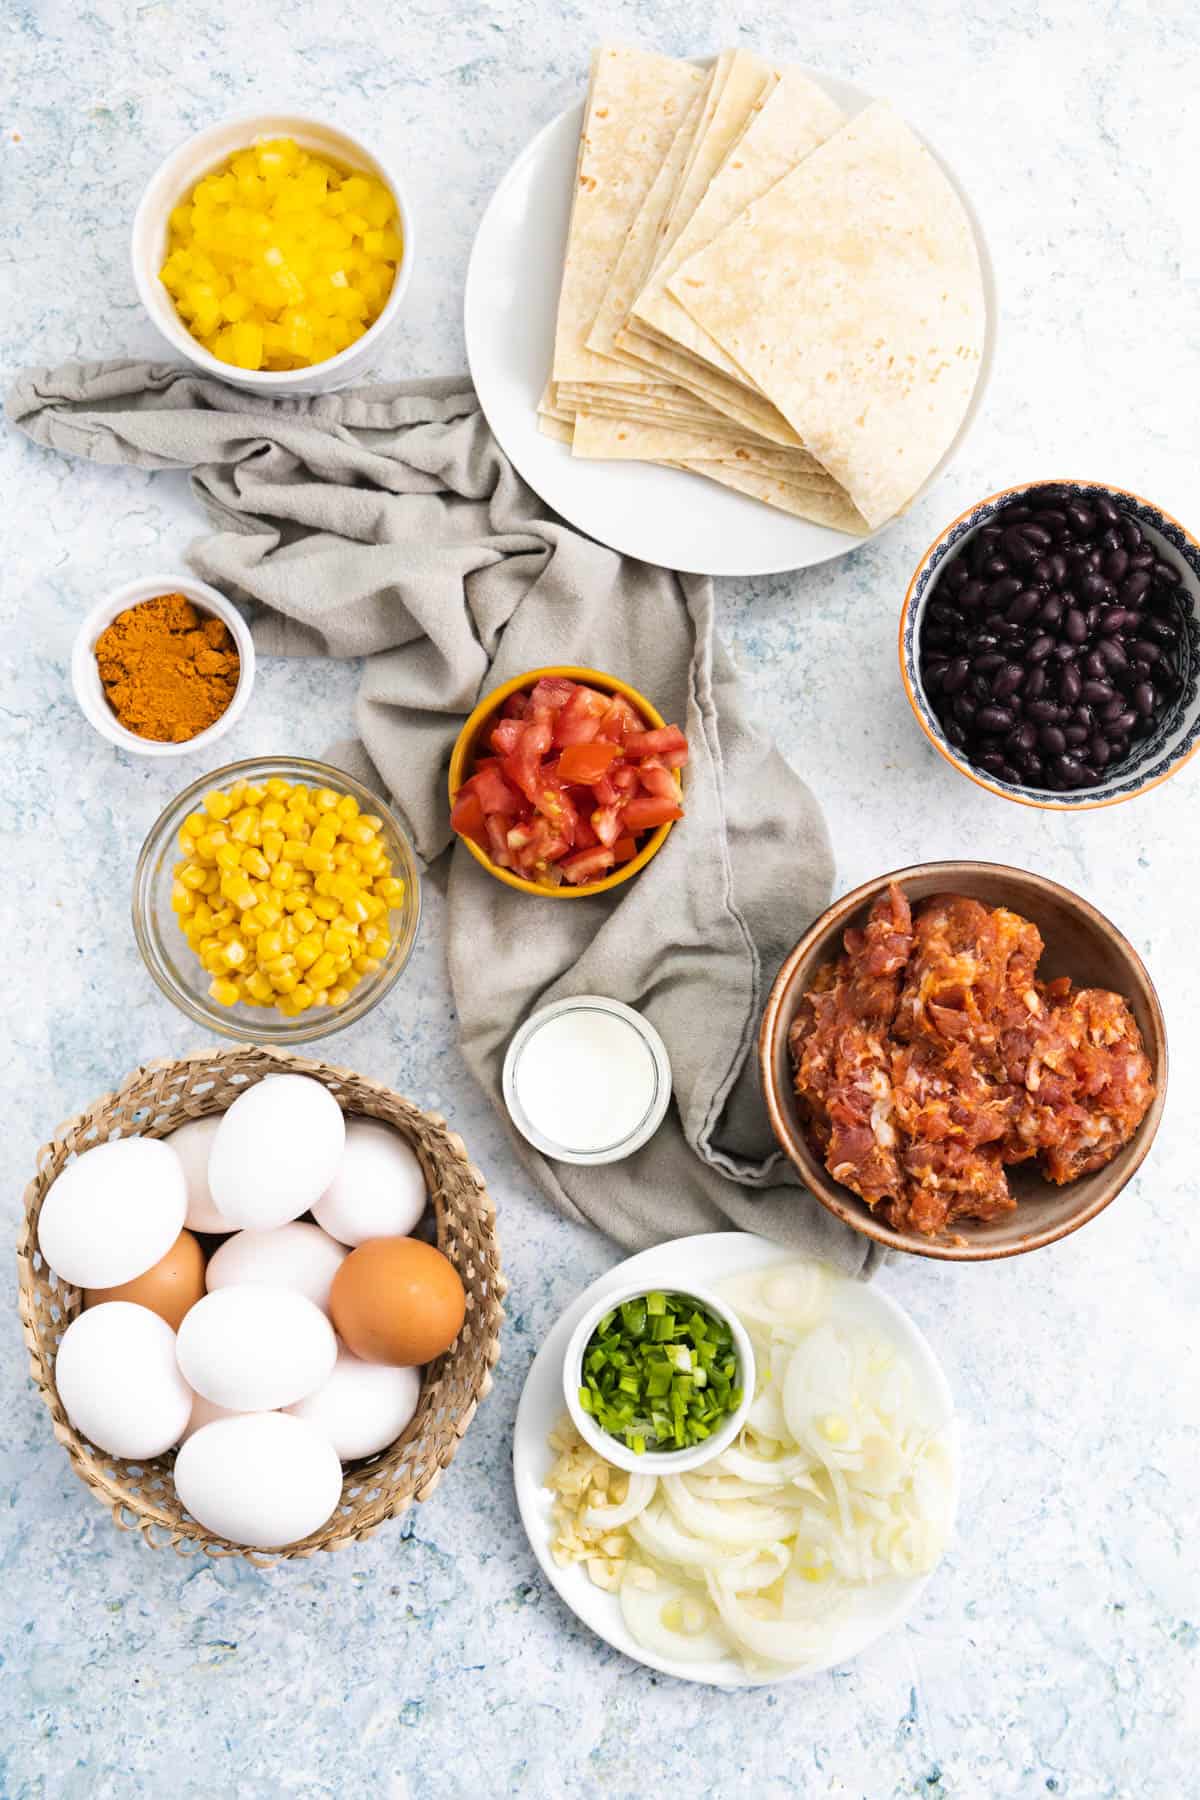 Ingredients for a bake: tortillas, pepper, beans, tomato, meat, eggs, corn. 